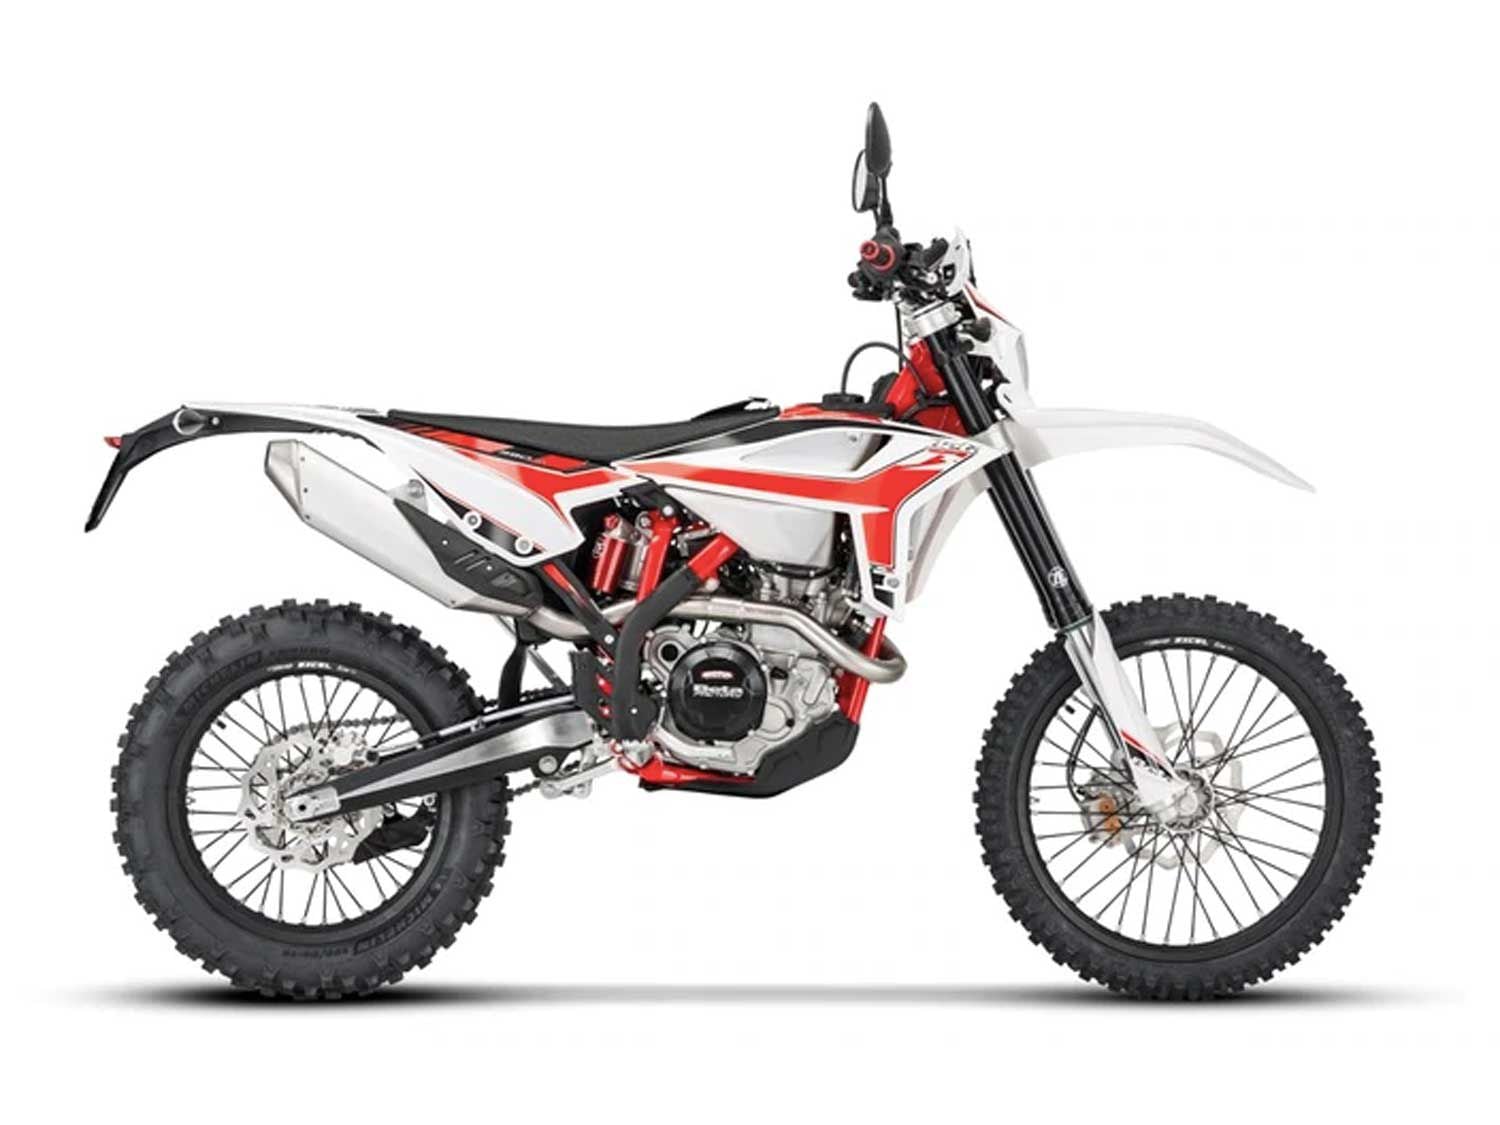 The Best Dual Sport Motorcycles For Sale In 2020 The Dirt Bike, MX.